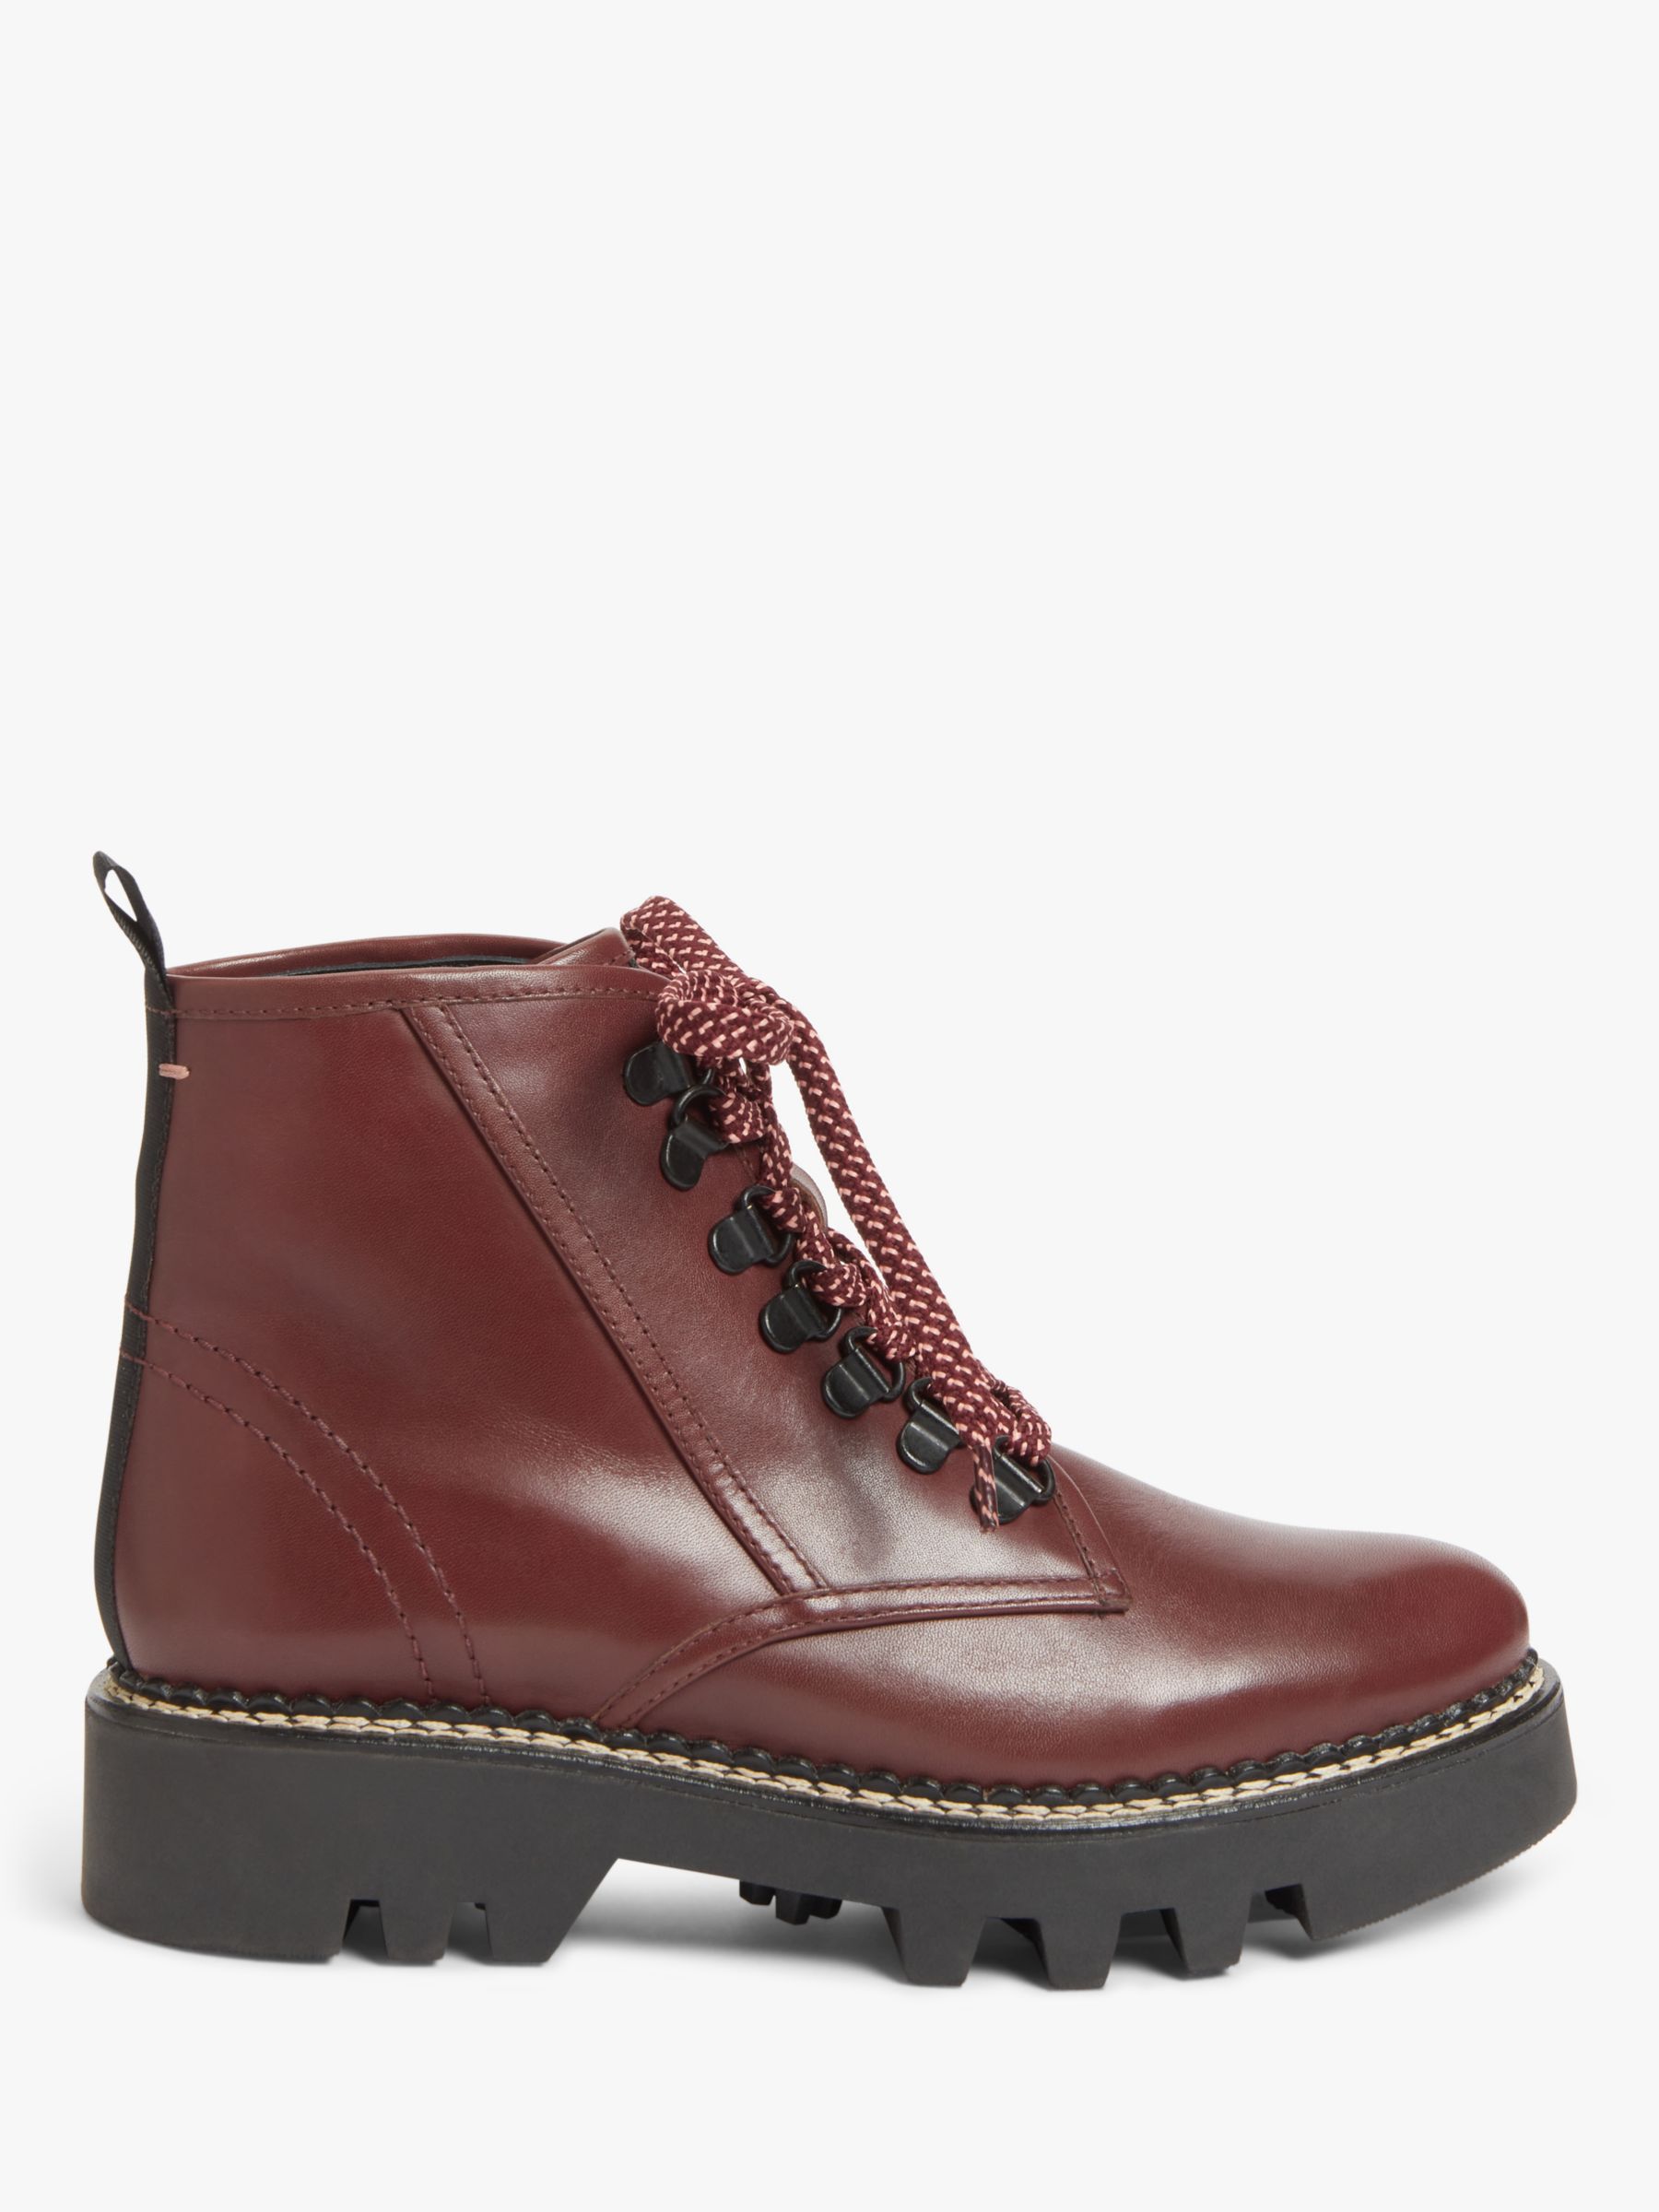 Kin Pinner Leather Lace Up Chunky Boots, Burgundy at John Lewis & Partners